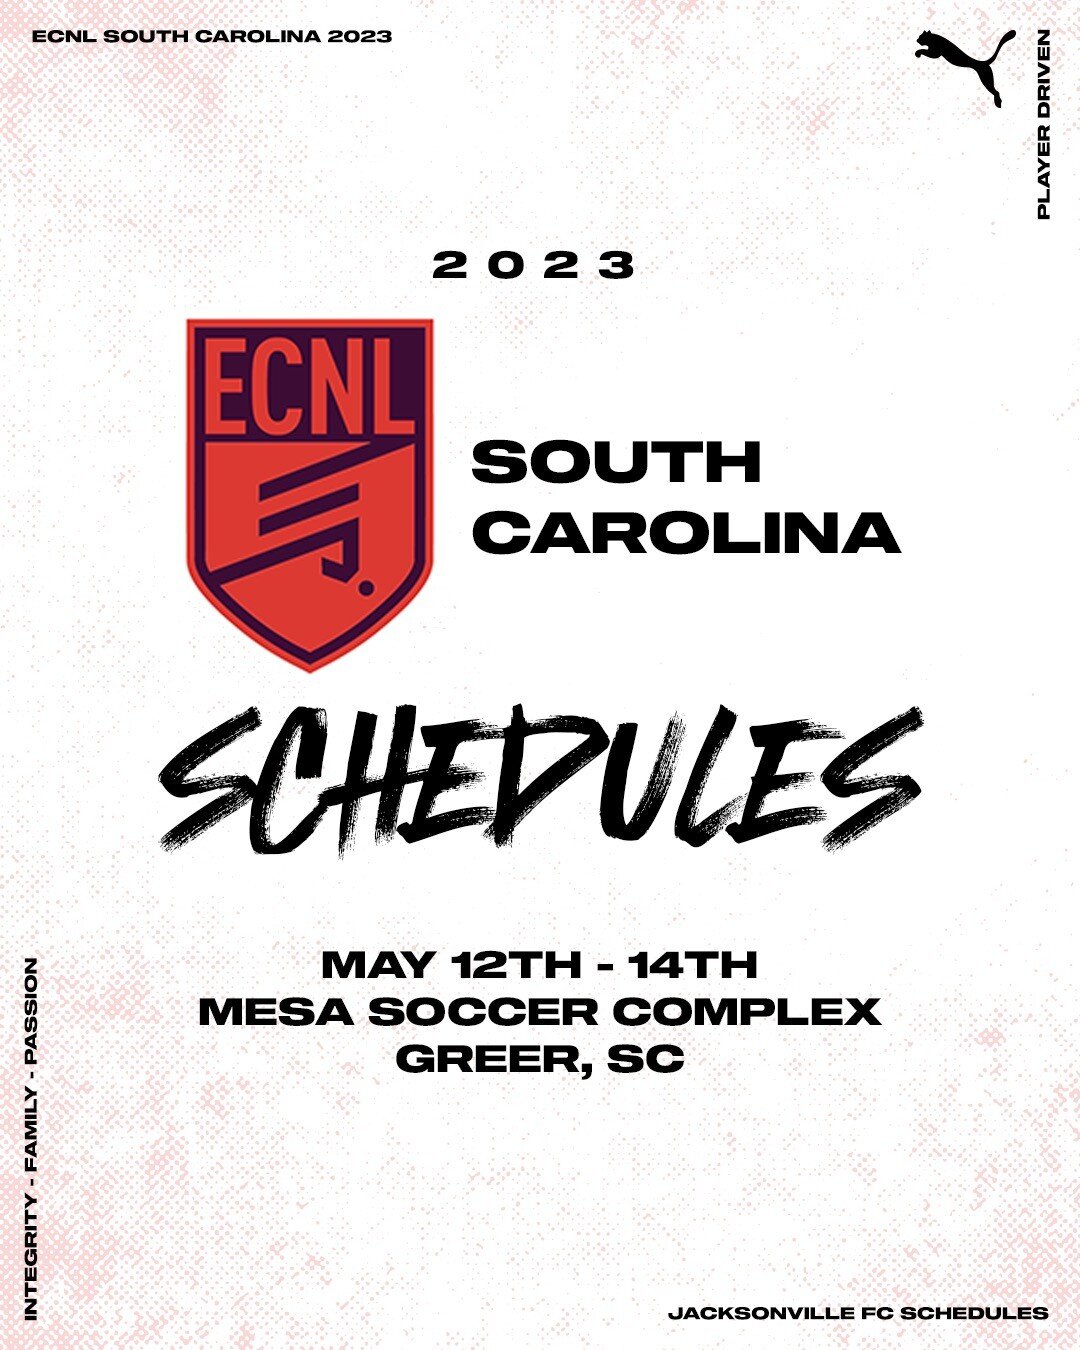 Our U14 and U13 ECNL, and U12 Pre ECNL Girls teams are up in Greer, South Carolina representing the 904 this weekend at the 2023 ECNL South Carolina Showcase.

Let's get after it girls!!! Good Luck and GO JFC!!!

#PlayerDriven #904jfc